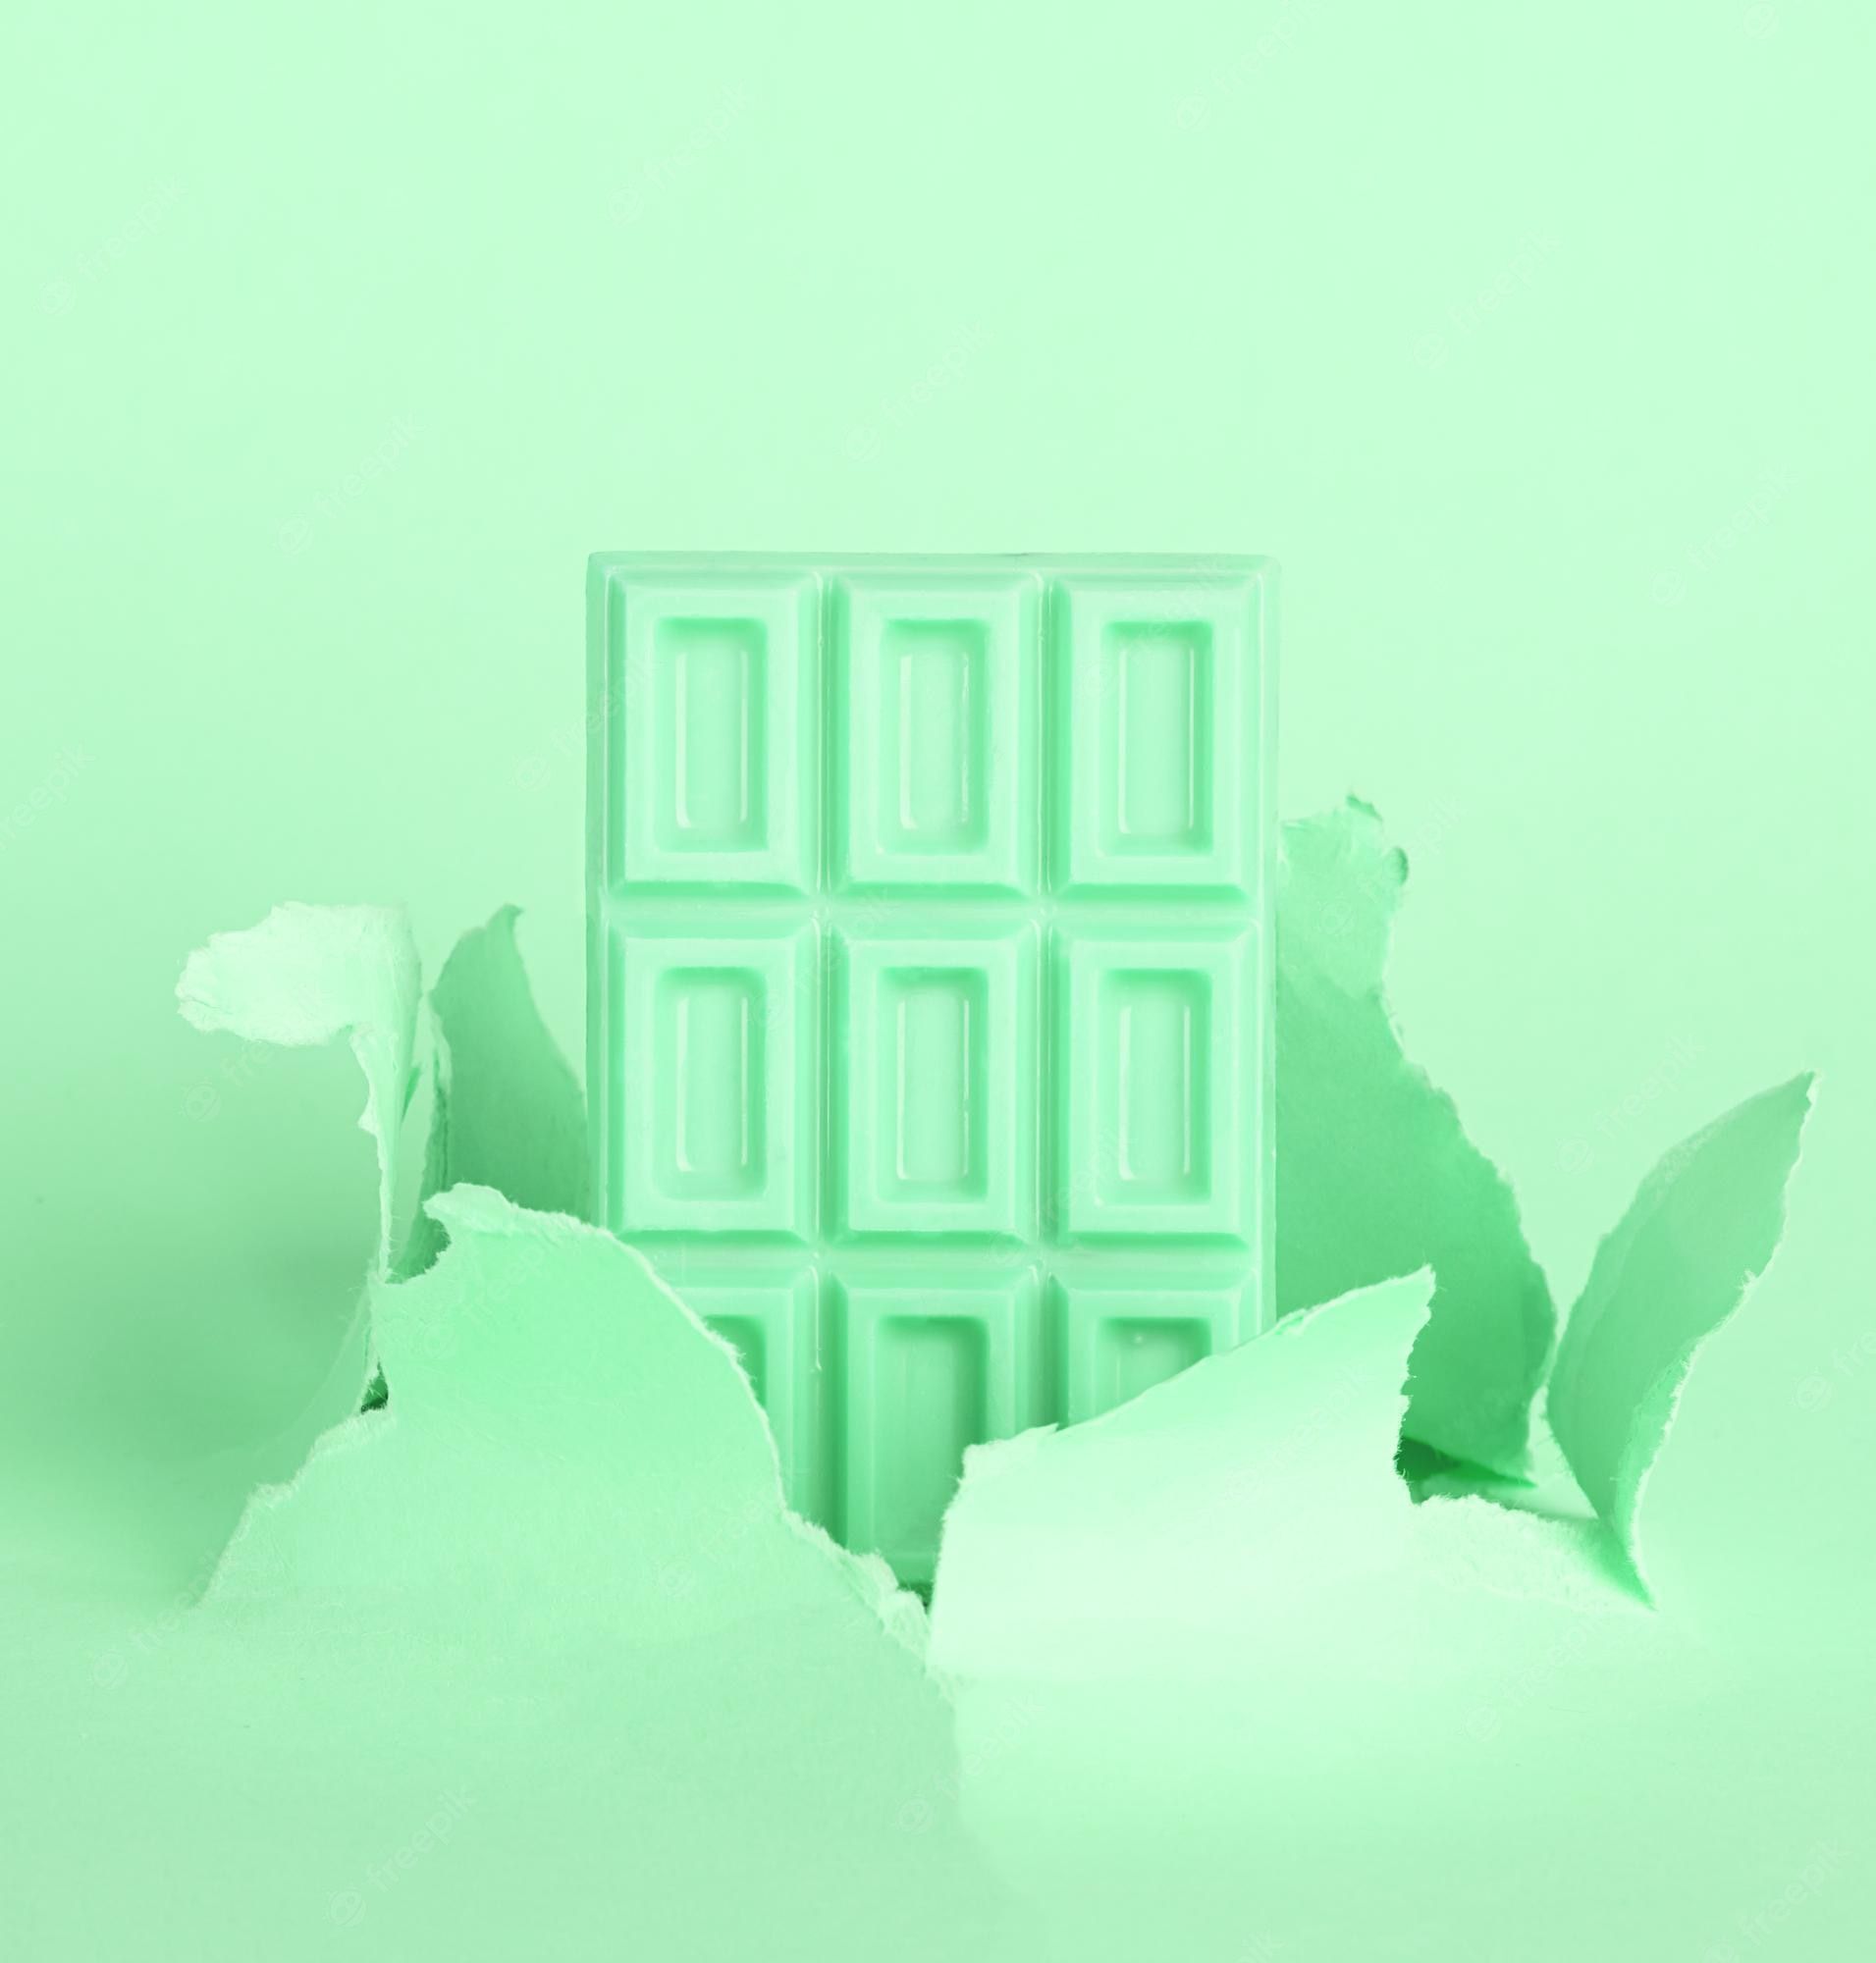 A mint green chocolate bar with a green background - Mint green